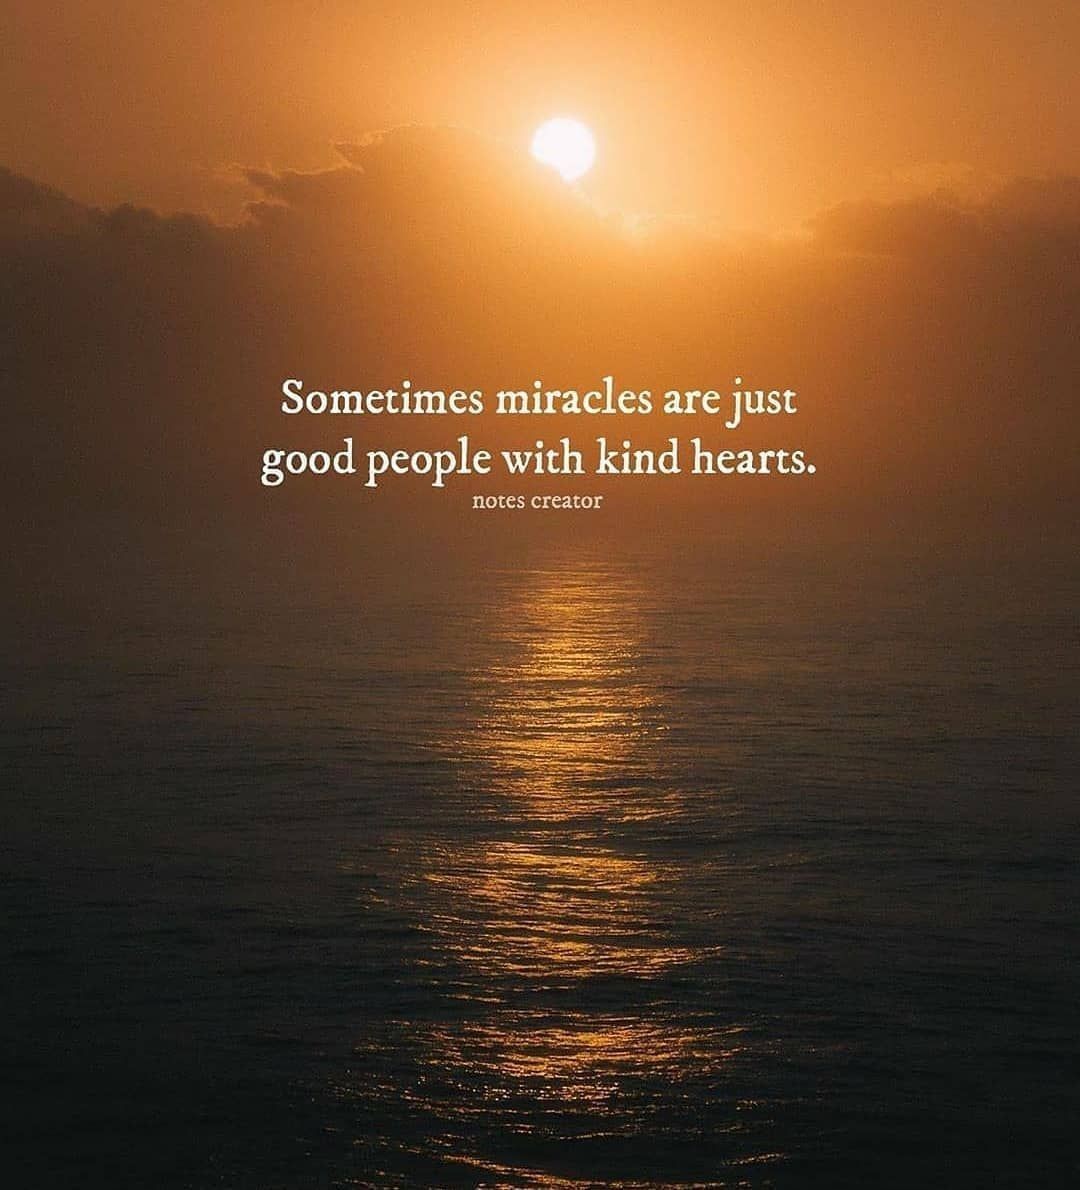 Sometimes miracles are just good people with kind hearts. - Phrases